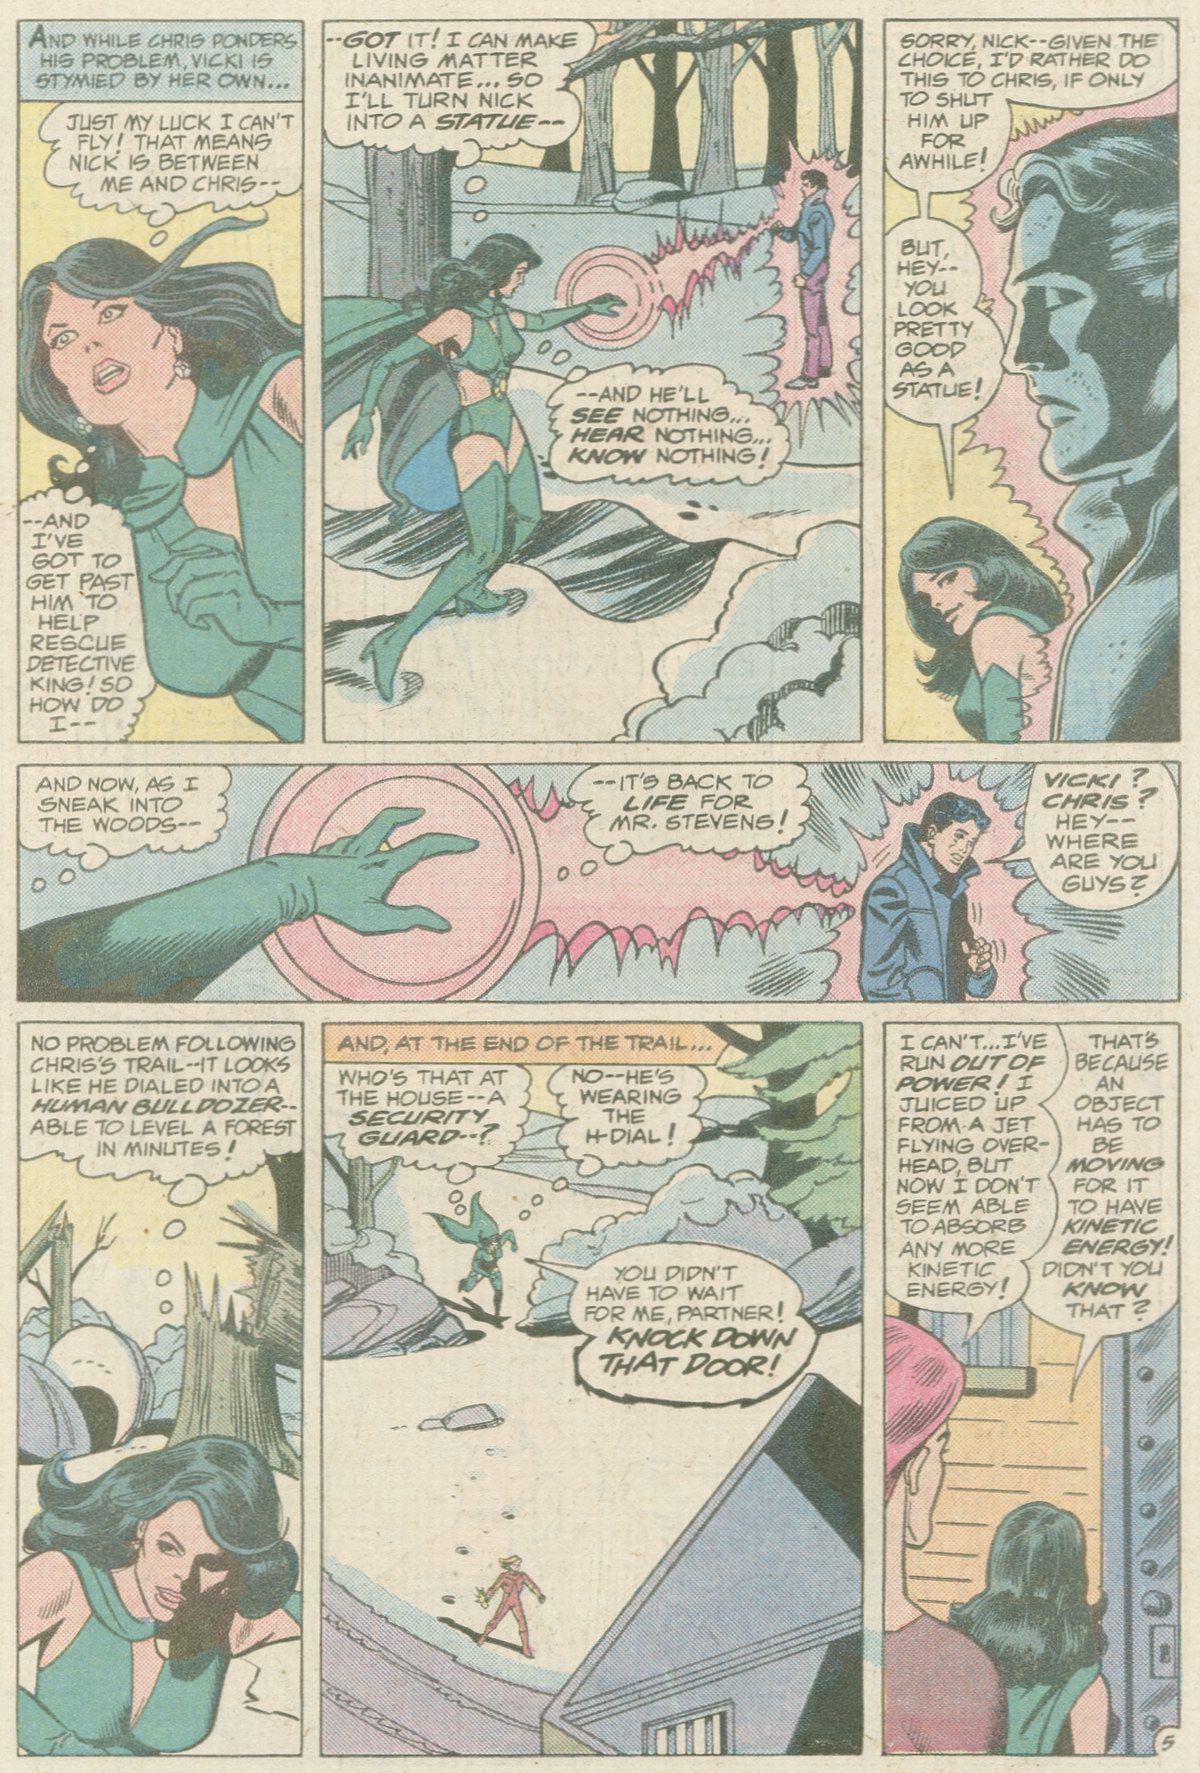 The New Adventures of Superboy 40 Page 23